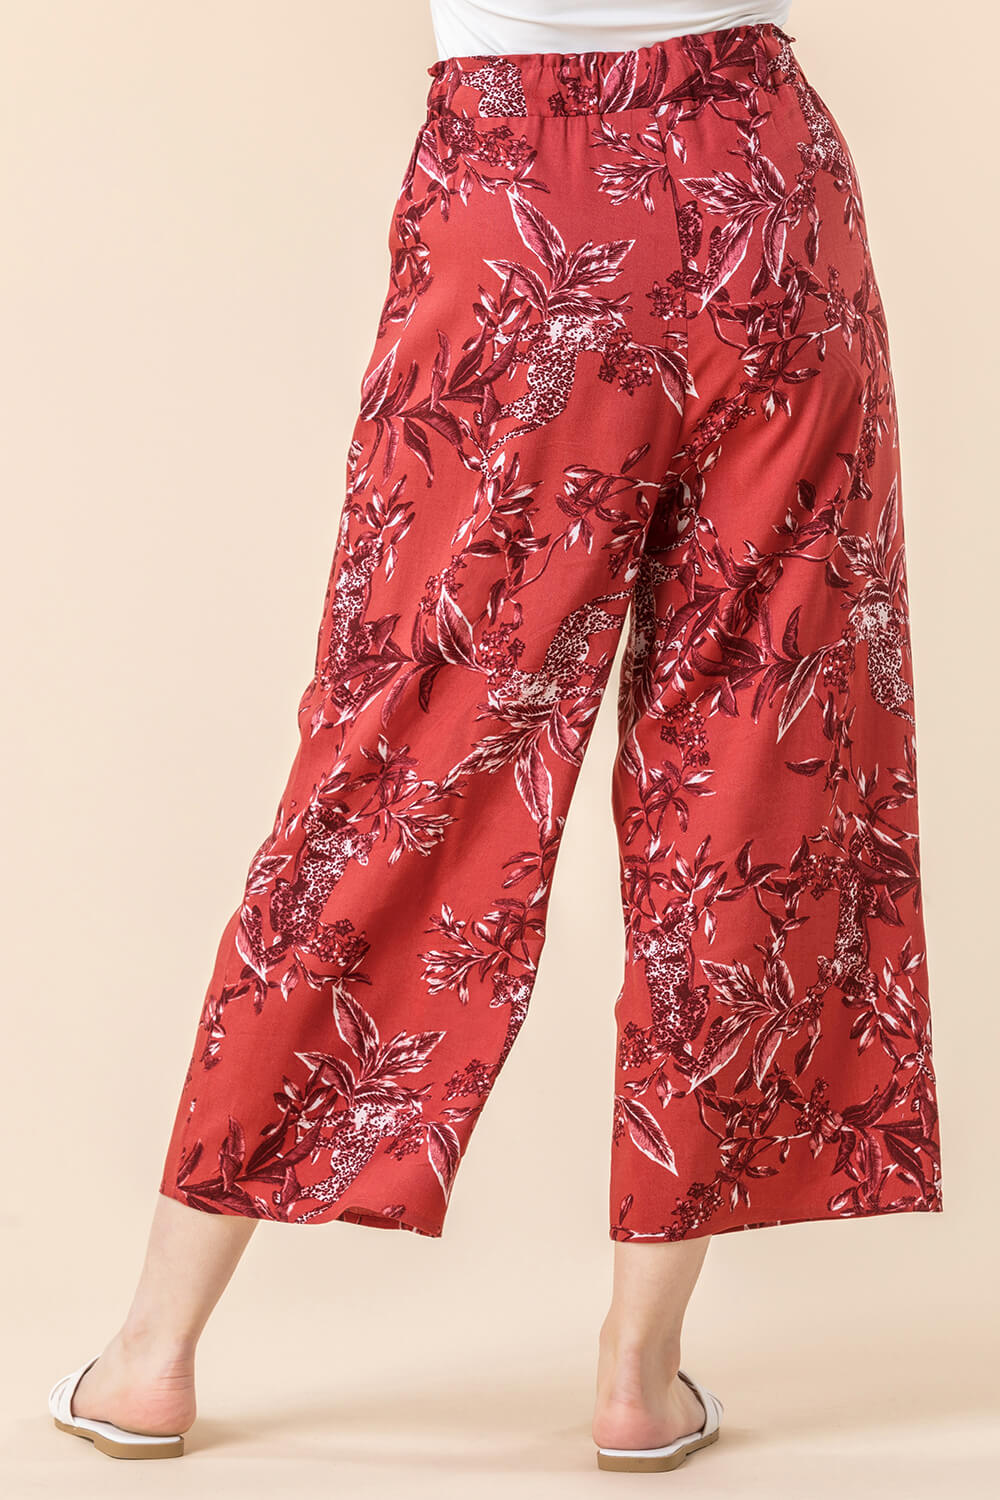 Maroon Leopard Leaf Print Culotte Trousers, Image 3 of 4